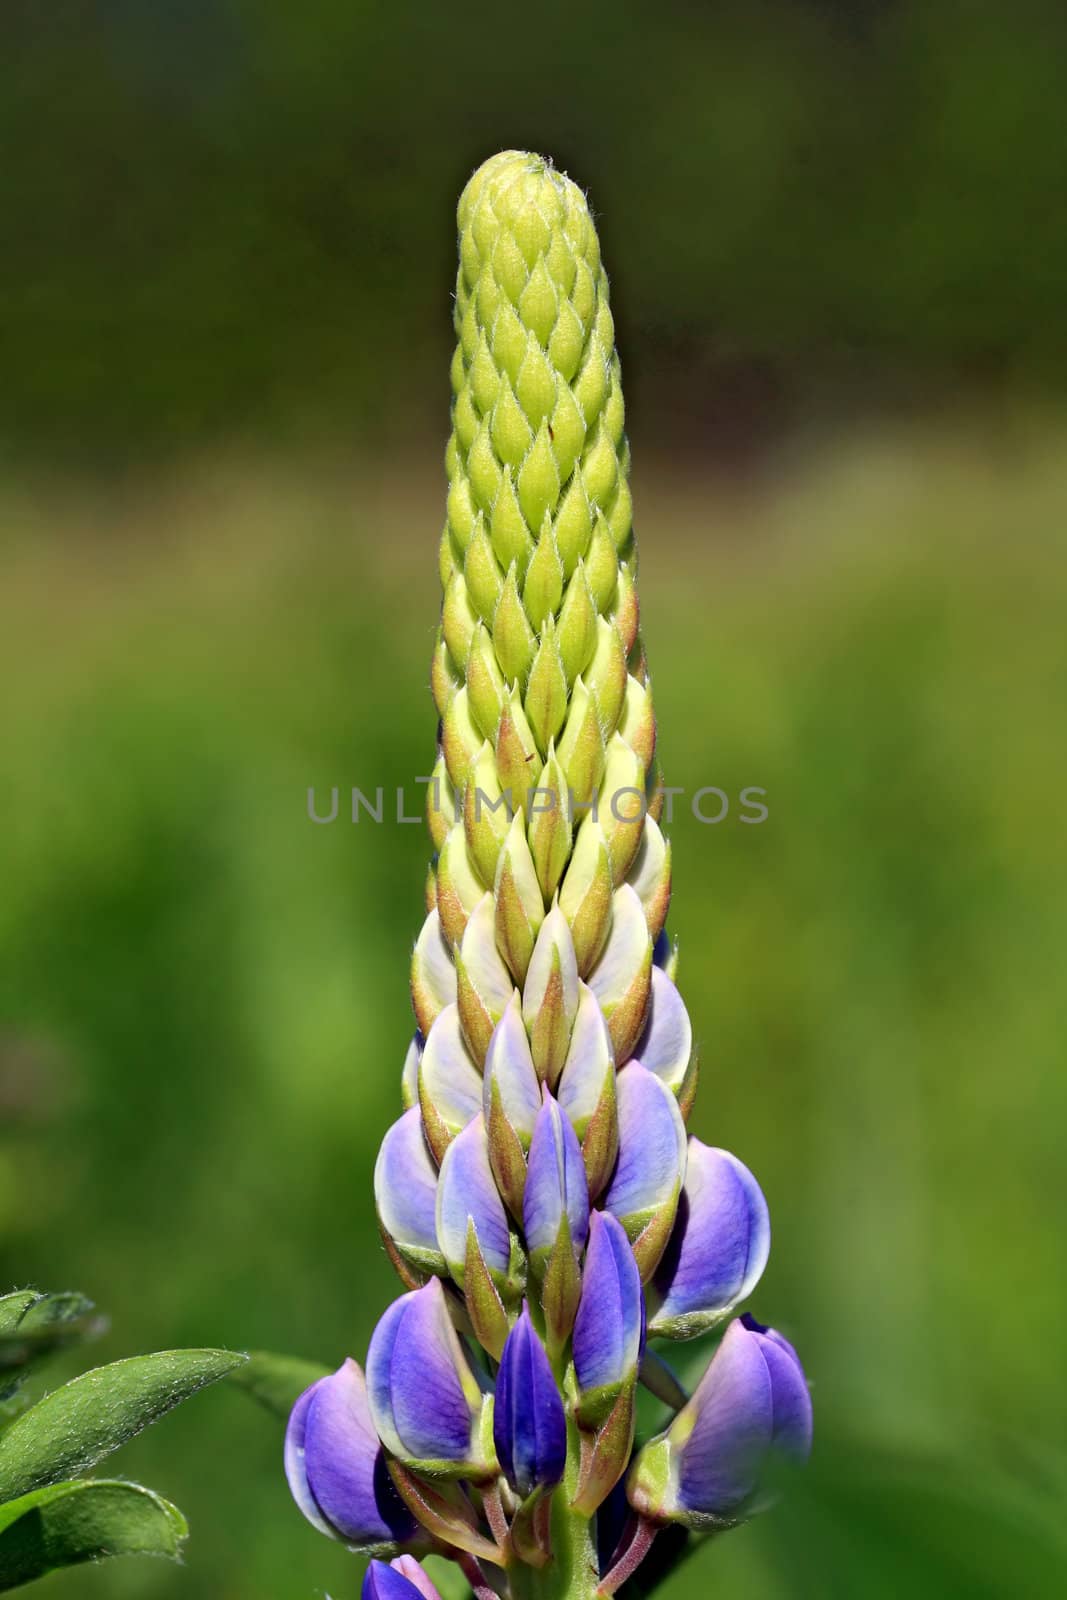 lupine on green background by basel101658